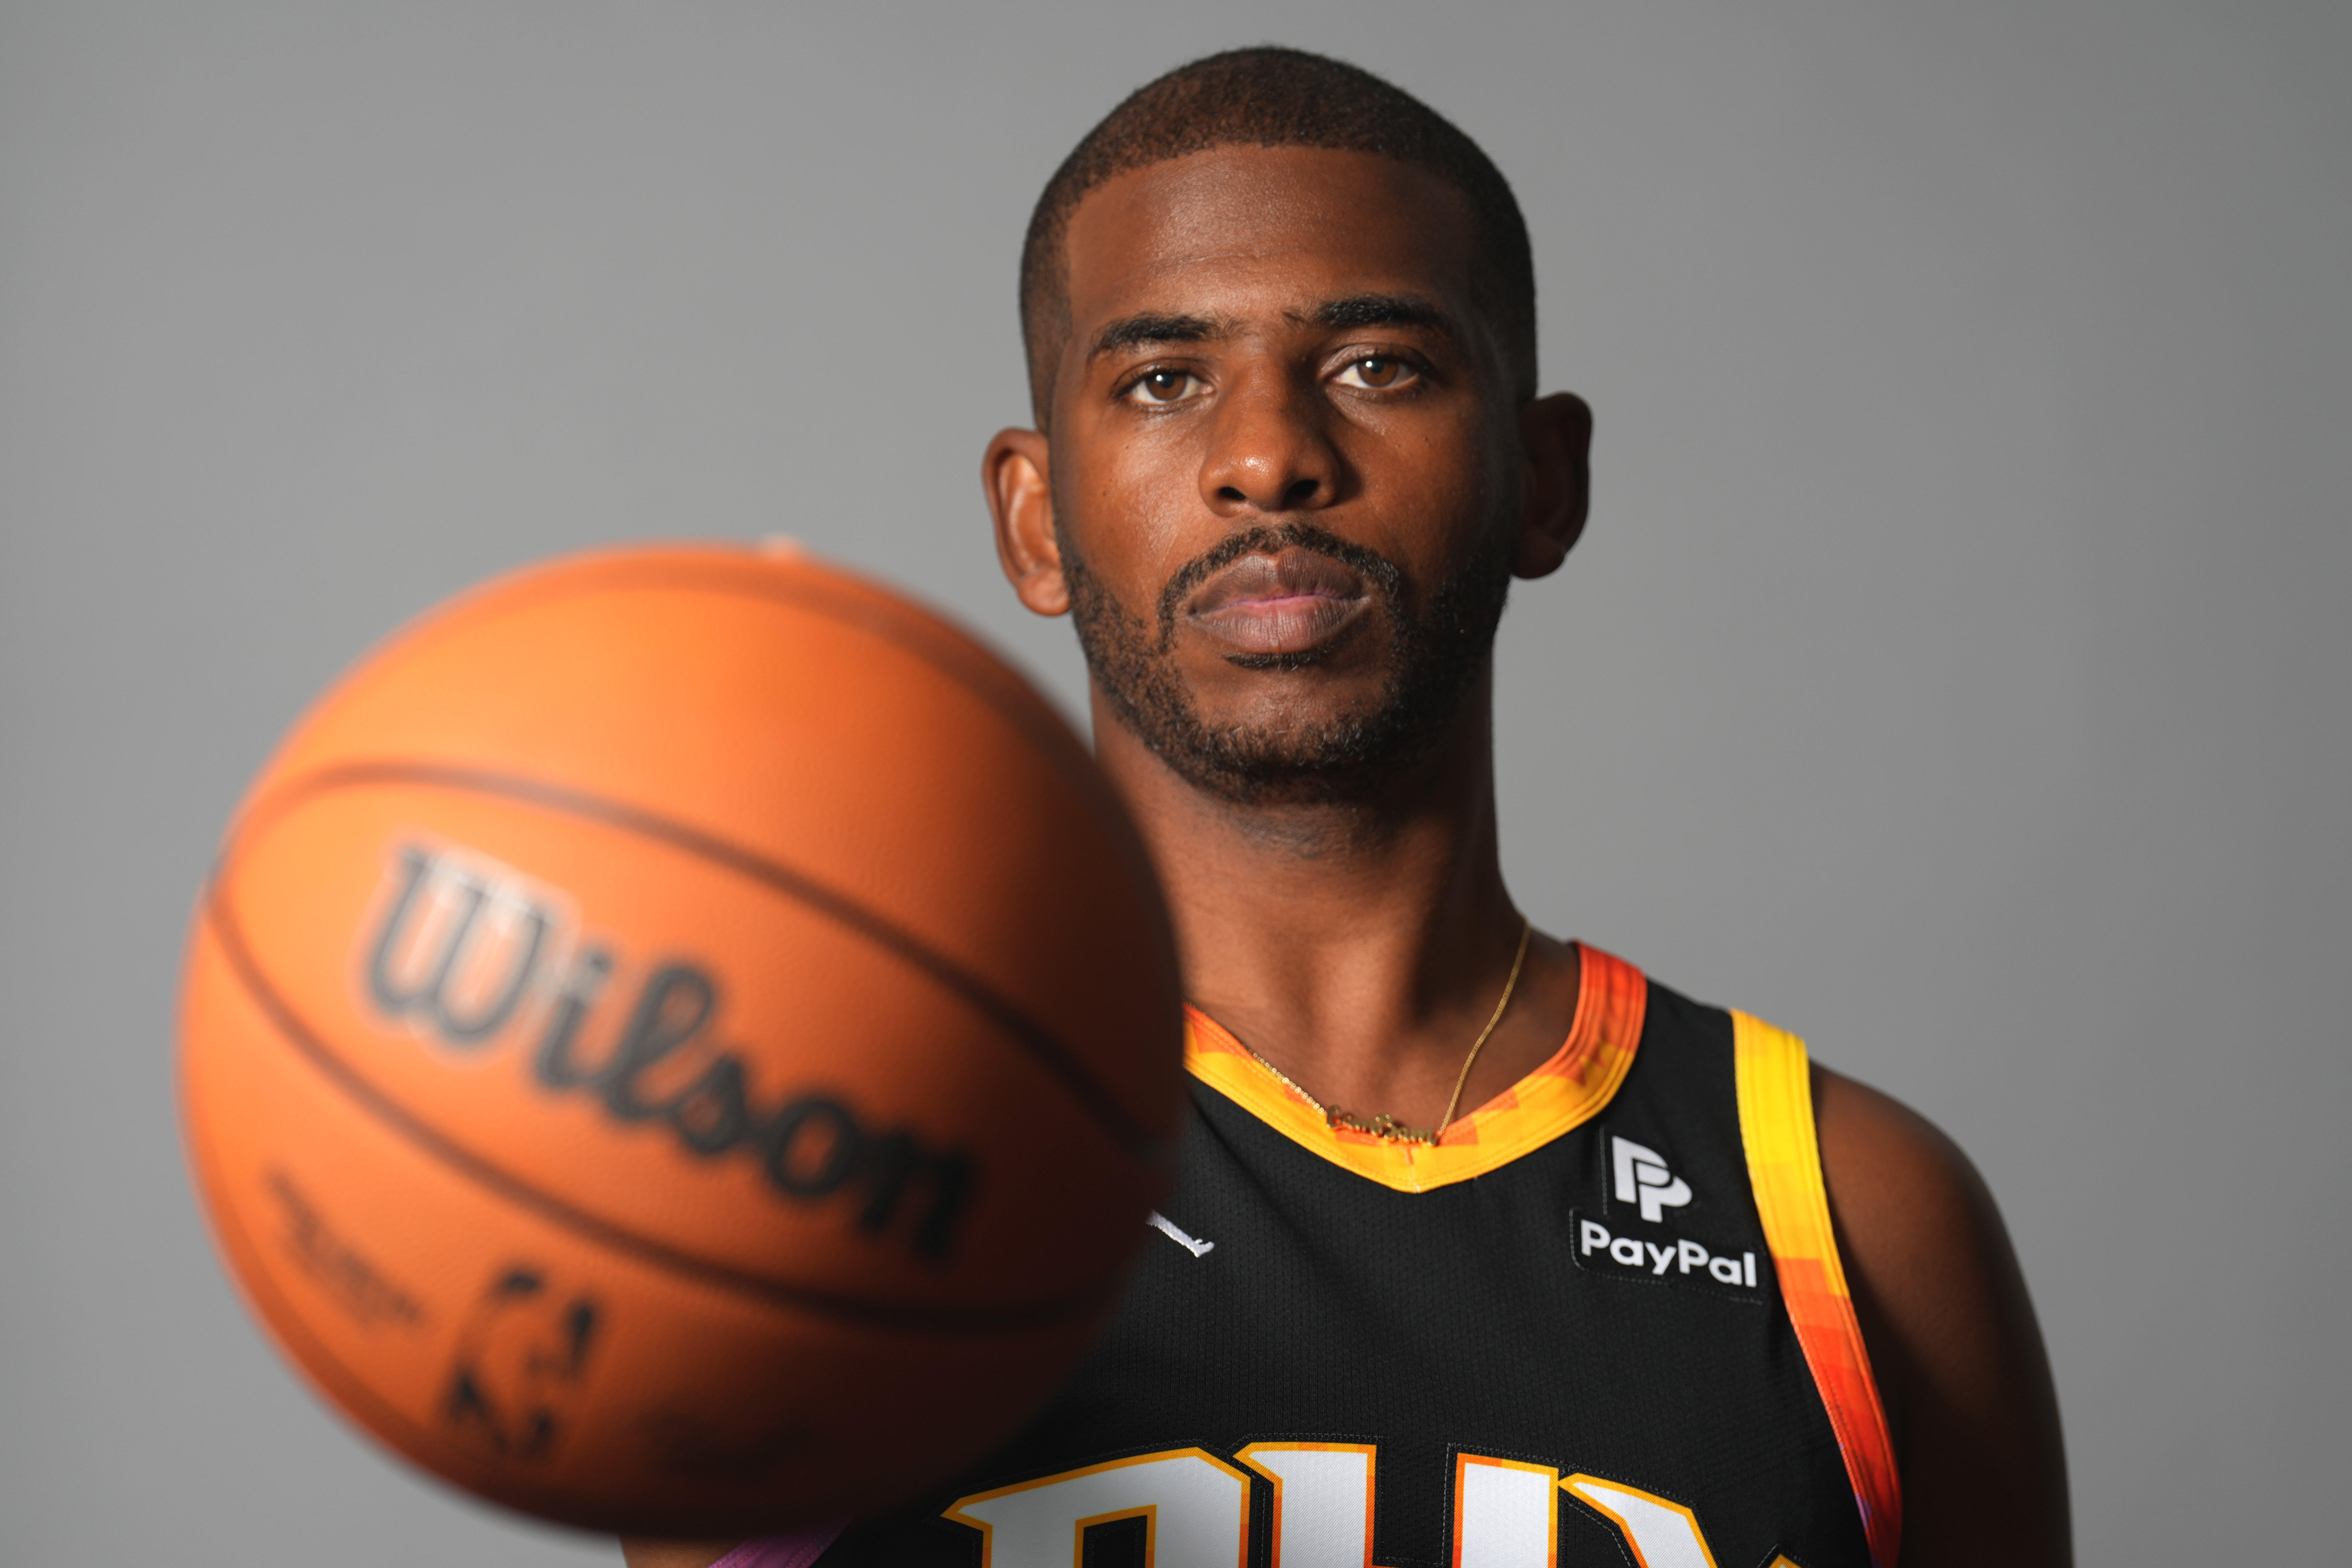 Chris Paul of the Phoenix Suns handles the ball during the game